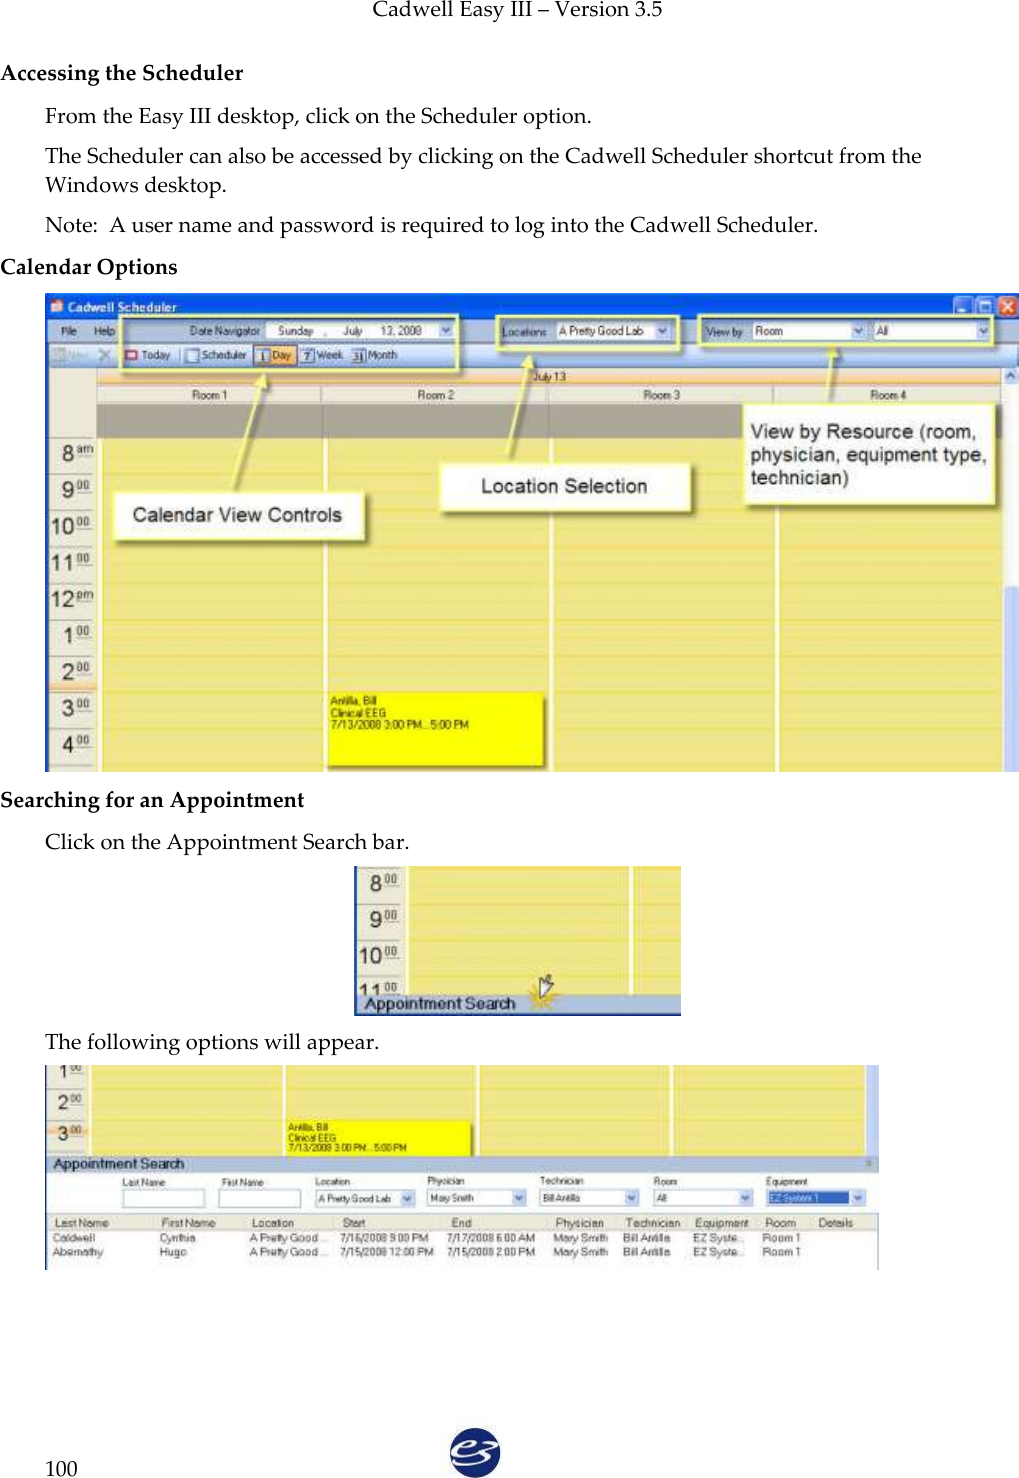 Cadwell Easy III – Version 3.5   100 Accessing the Scheduler From the Easy III desktop, click on the Scheduler option. The Scheduler can also be accessed by clicking on the Cadwell Scheduler shortcut from the Windows desktop. Note:  A user name and password is required to log into the Cadwell Scheduler. Calendar Options  Searching for an Appointment Click on the Appointment Search bar.  The following options will appear.  